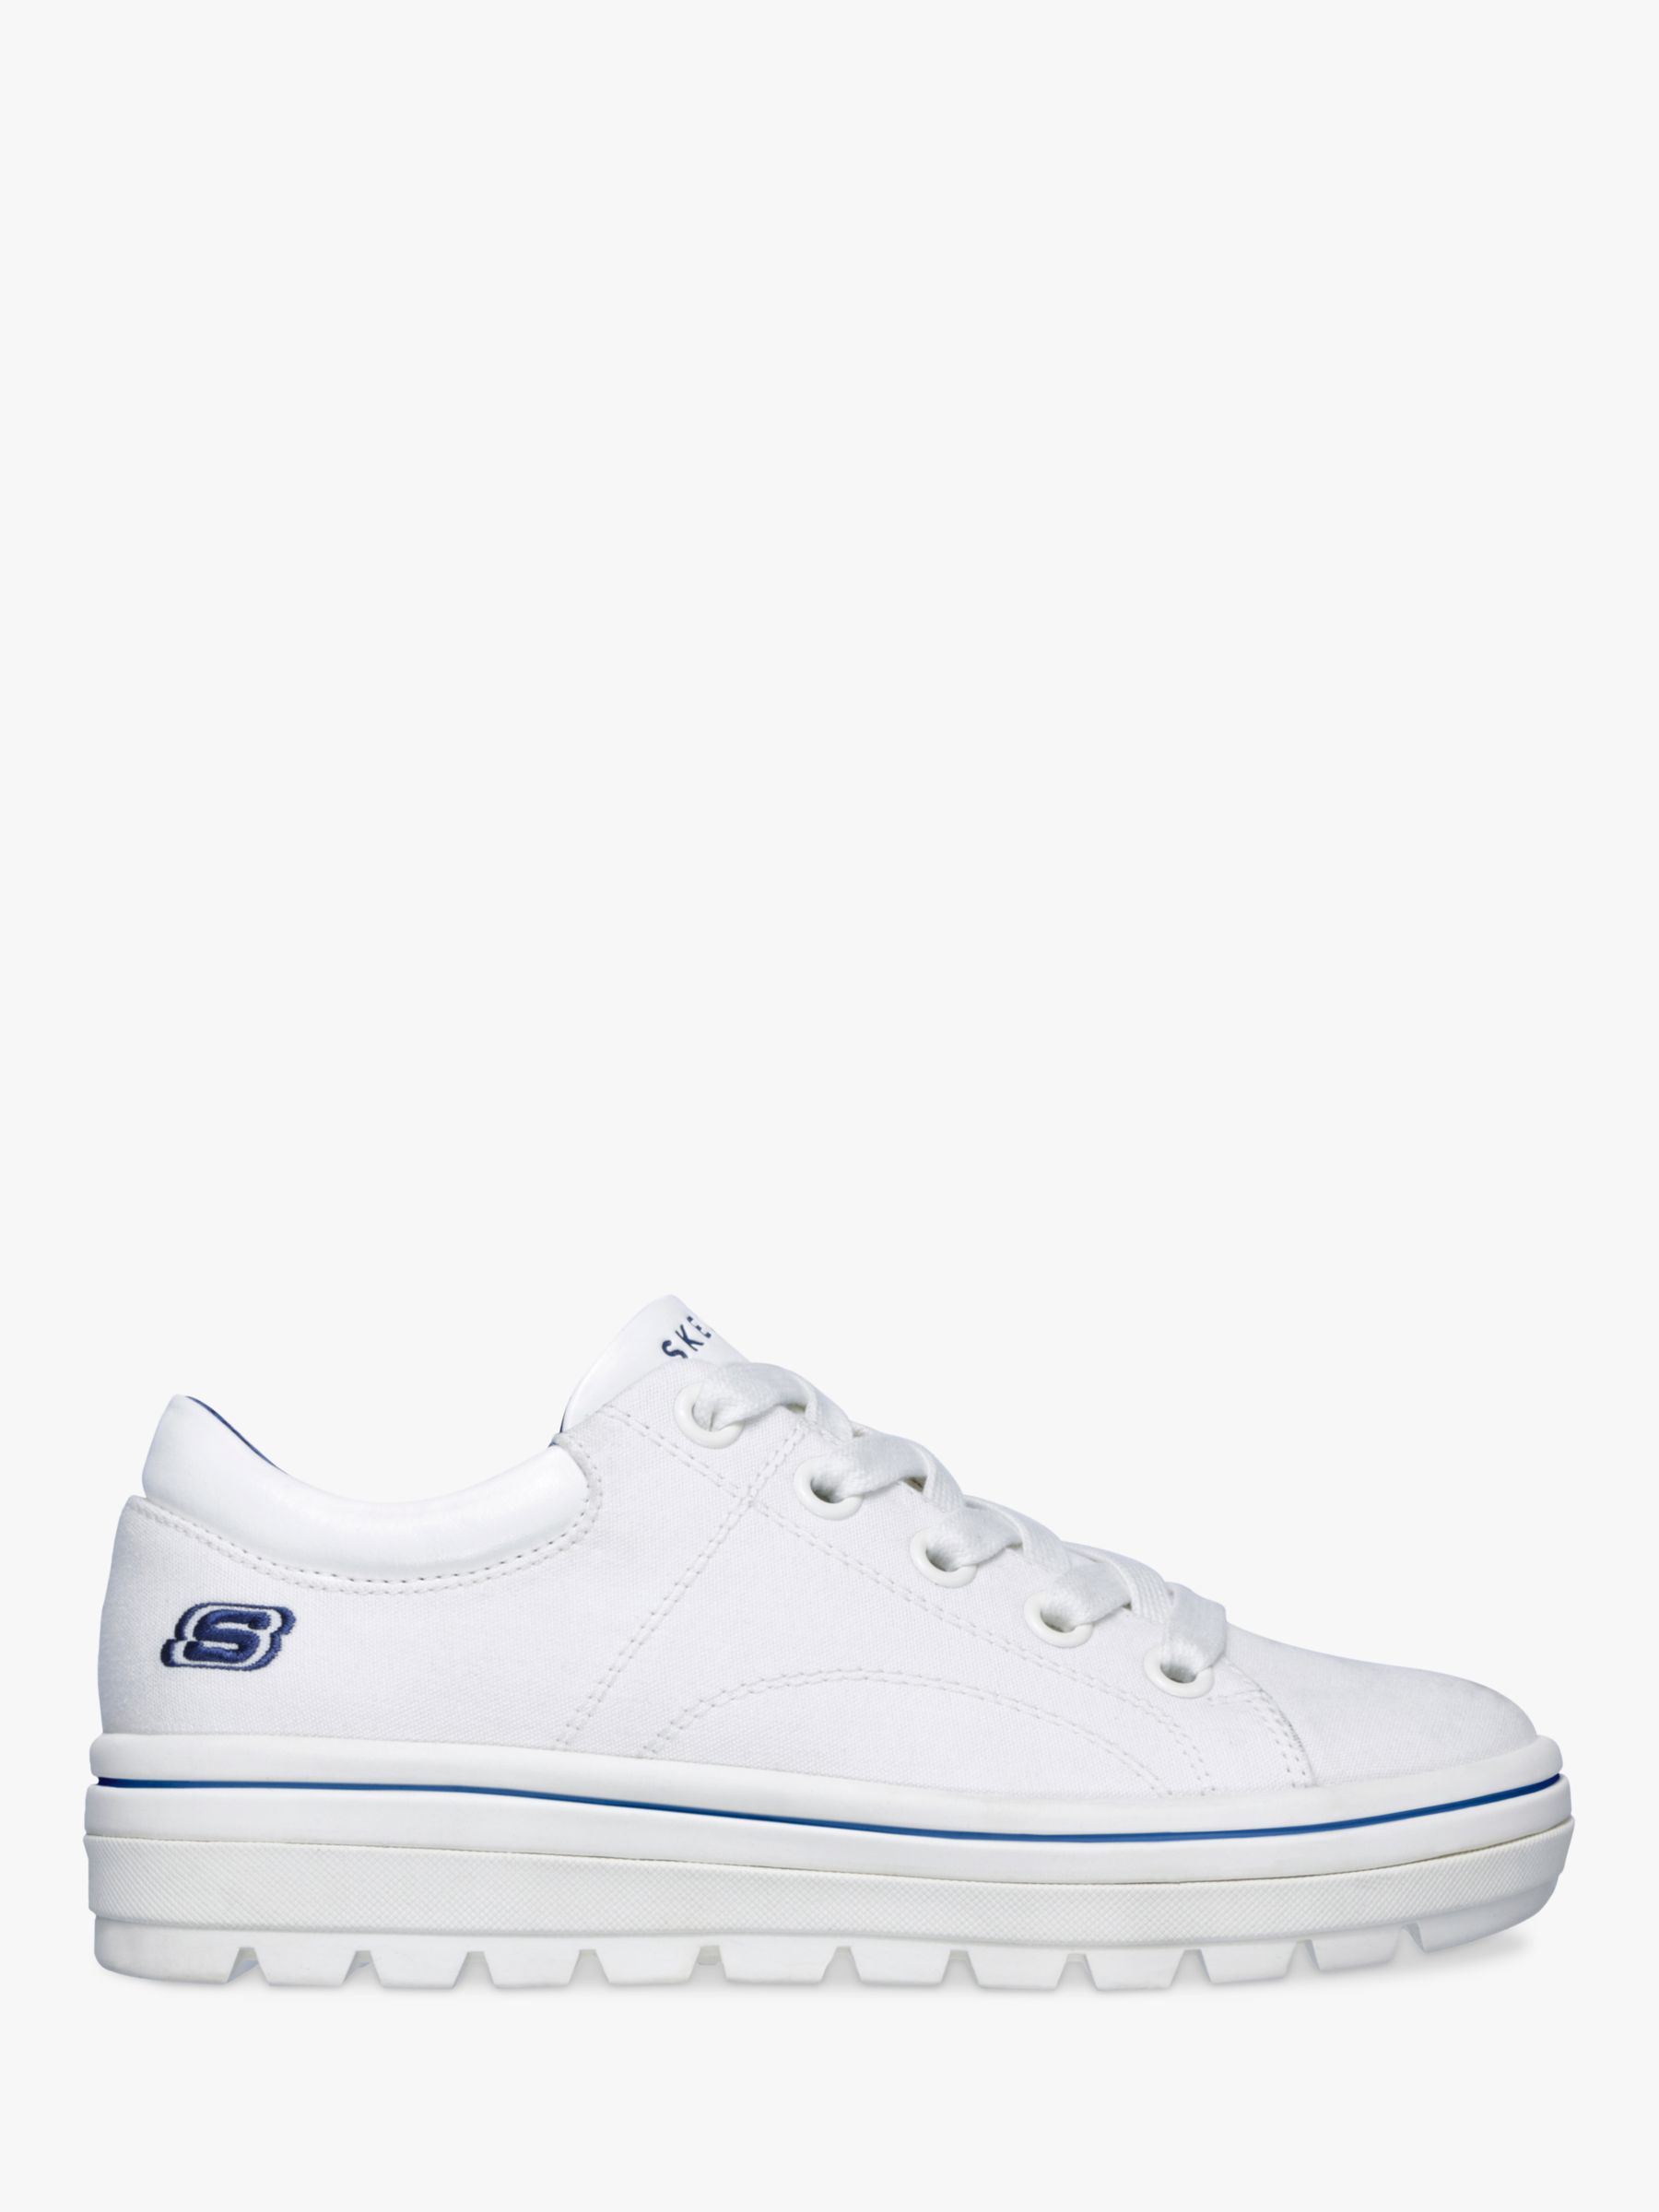 sketchers white trainers